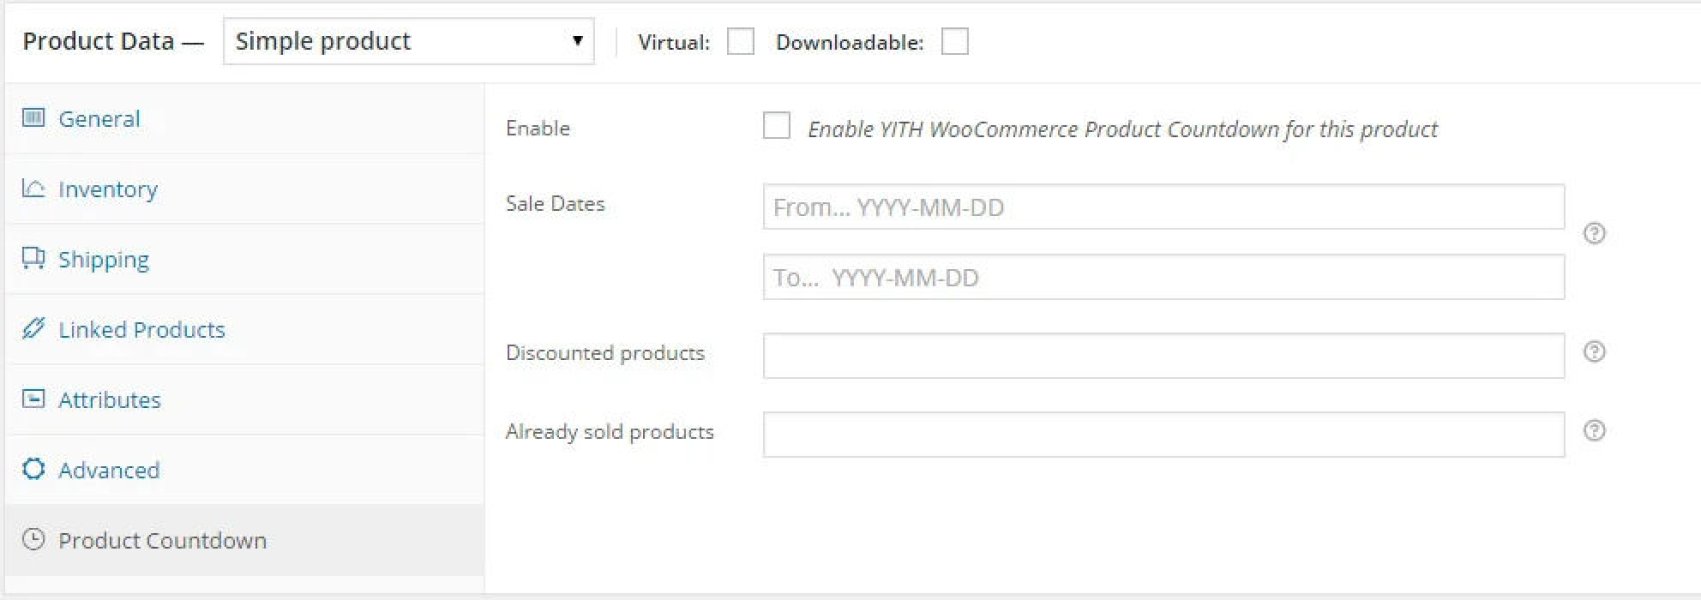 YITH Woocommerce Product Countdown